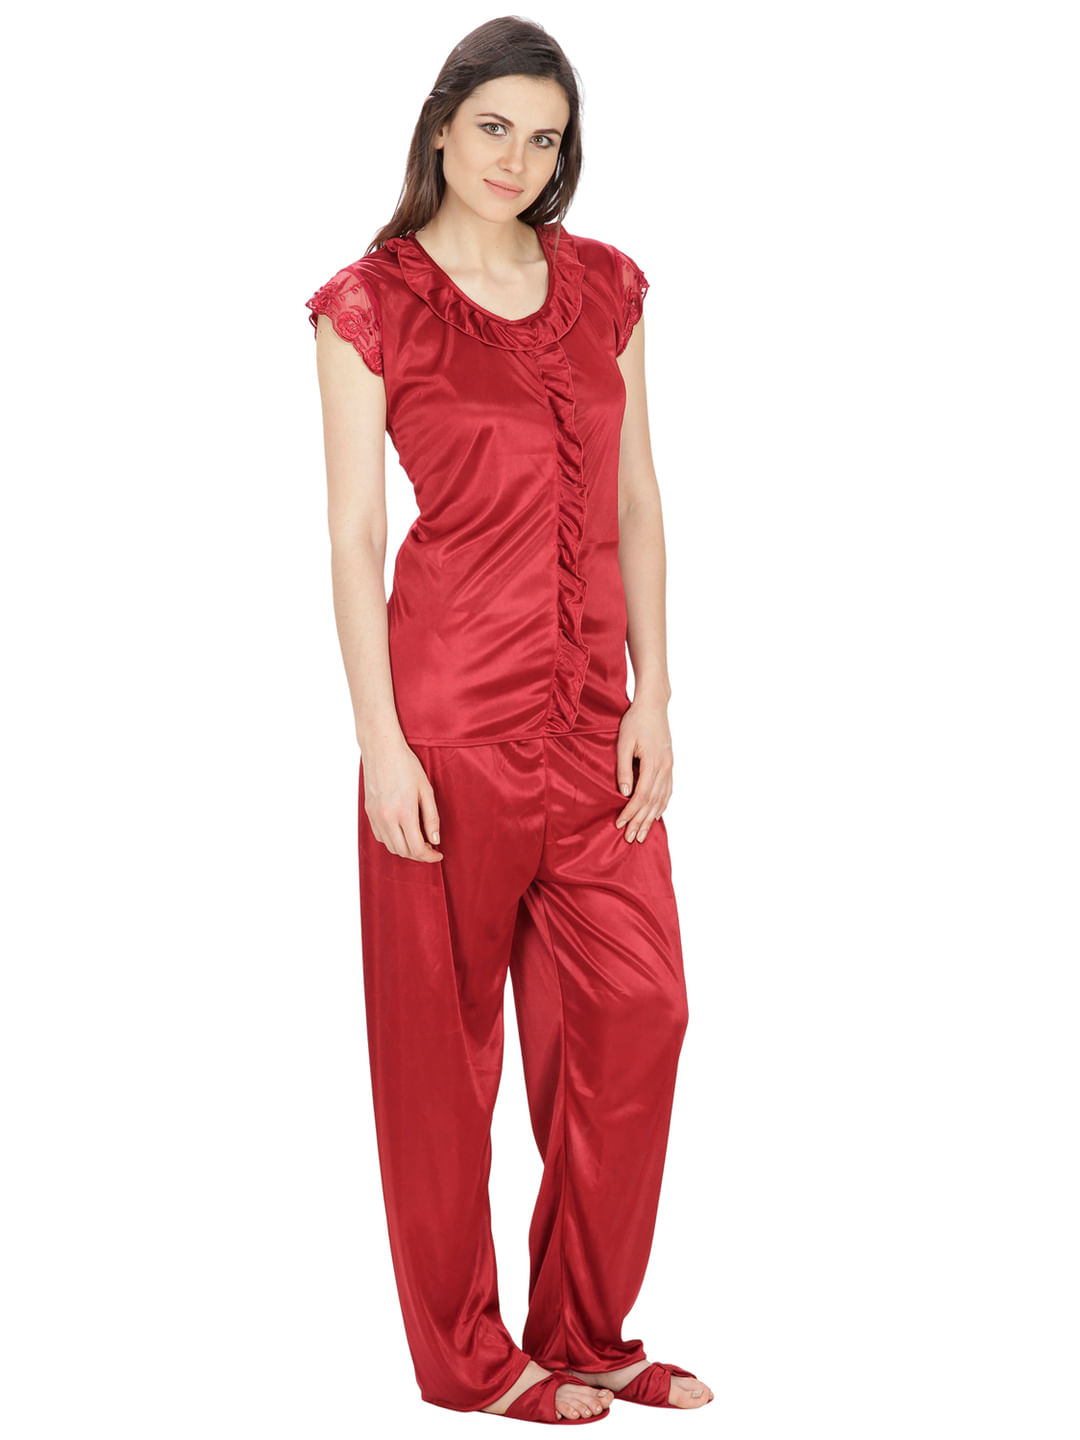 Satin Maroon Nightsuit Set with Slippers (Maroon, Free Size)